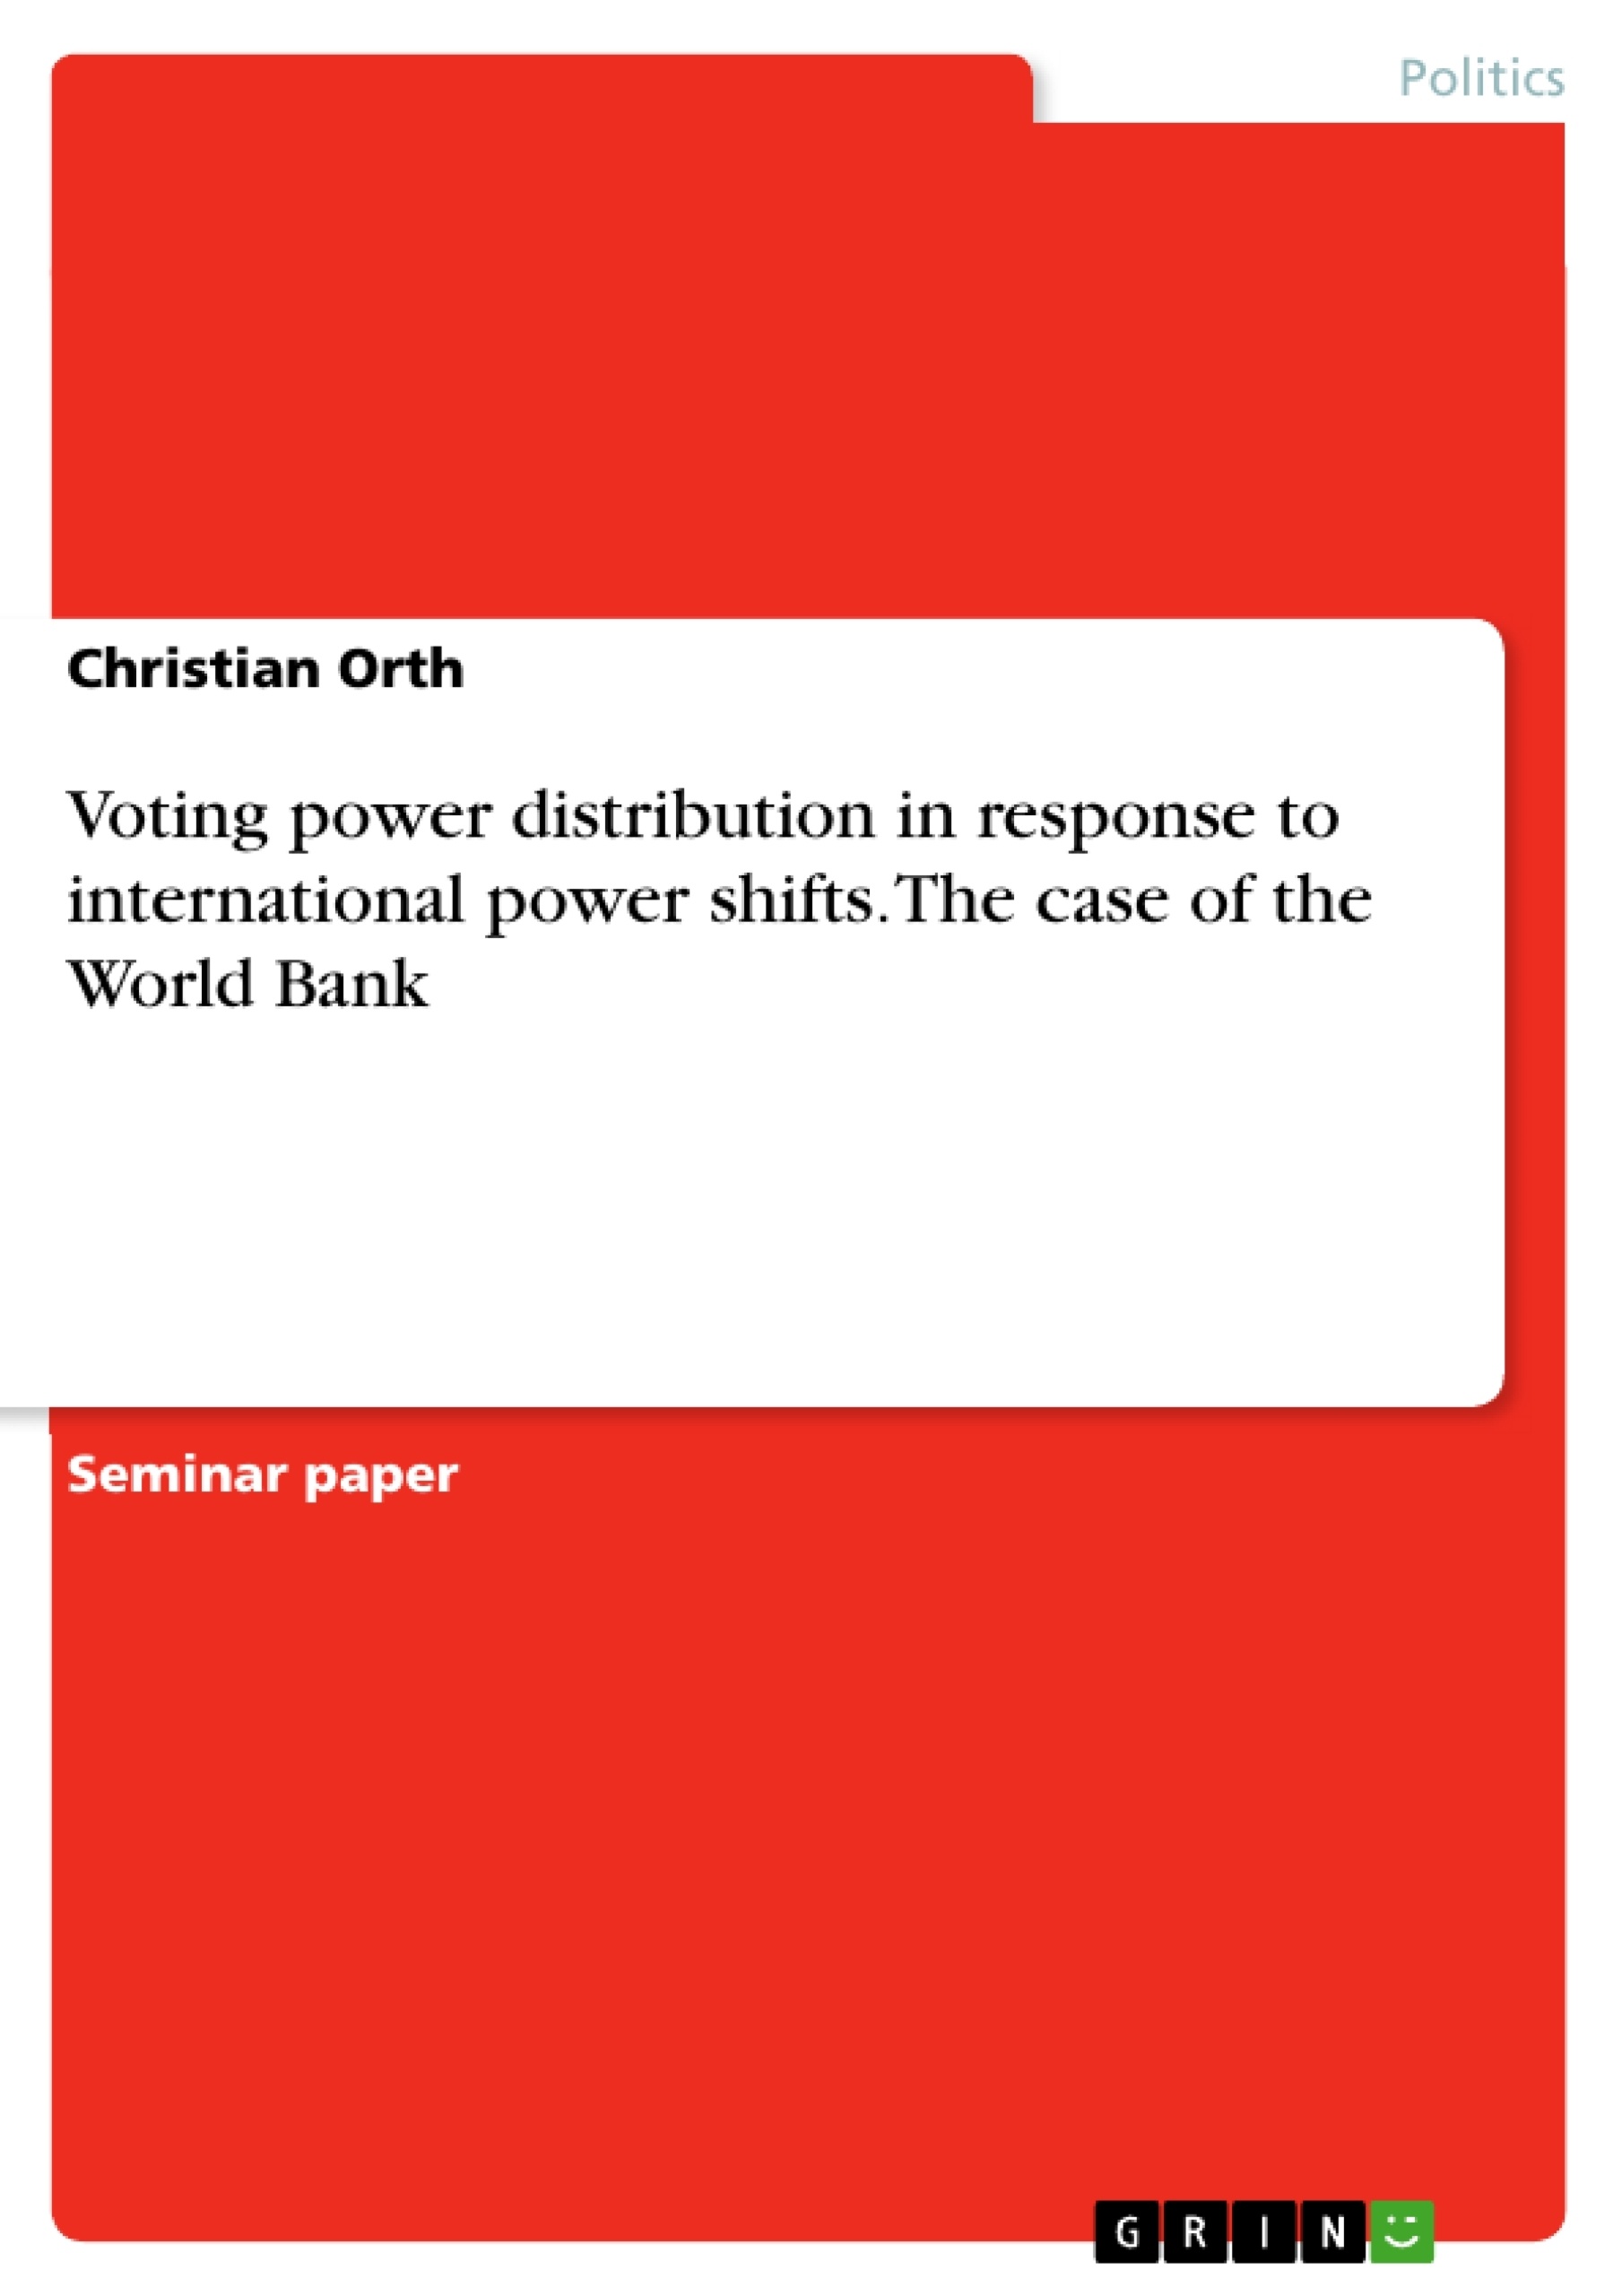 Title: Voting power distribution in response to international power shifts. The case of the World Bank